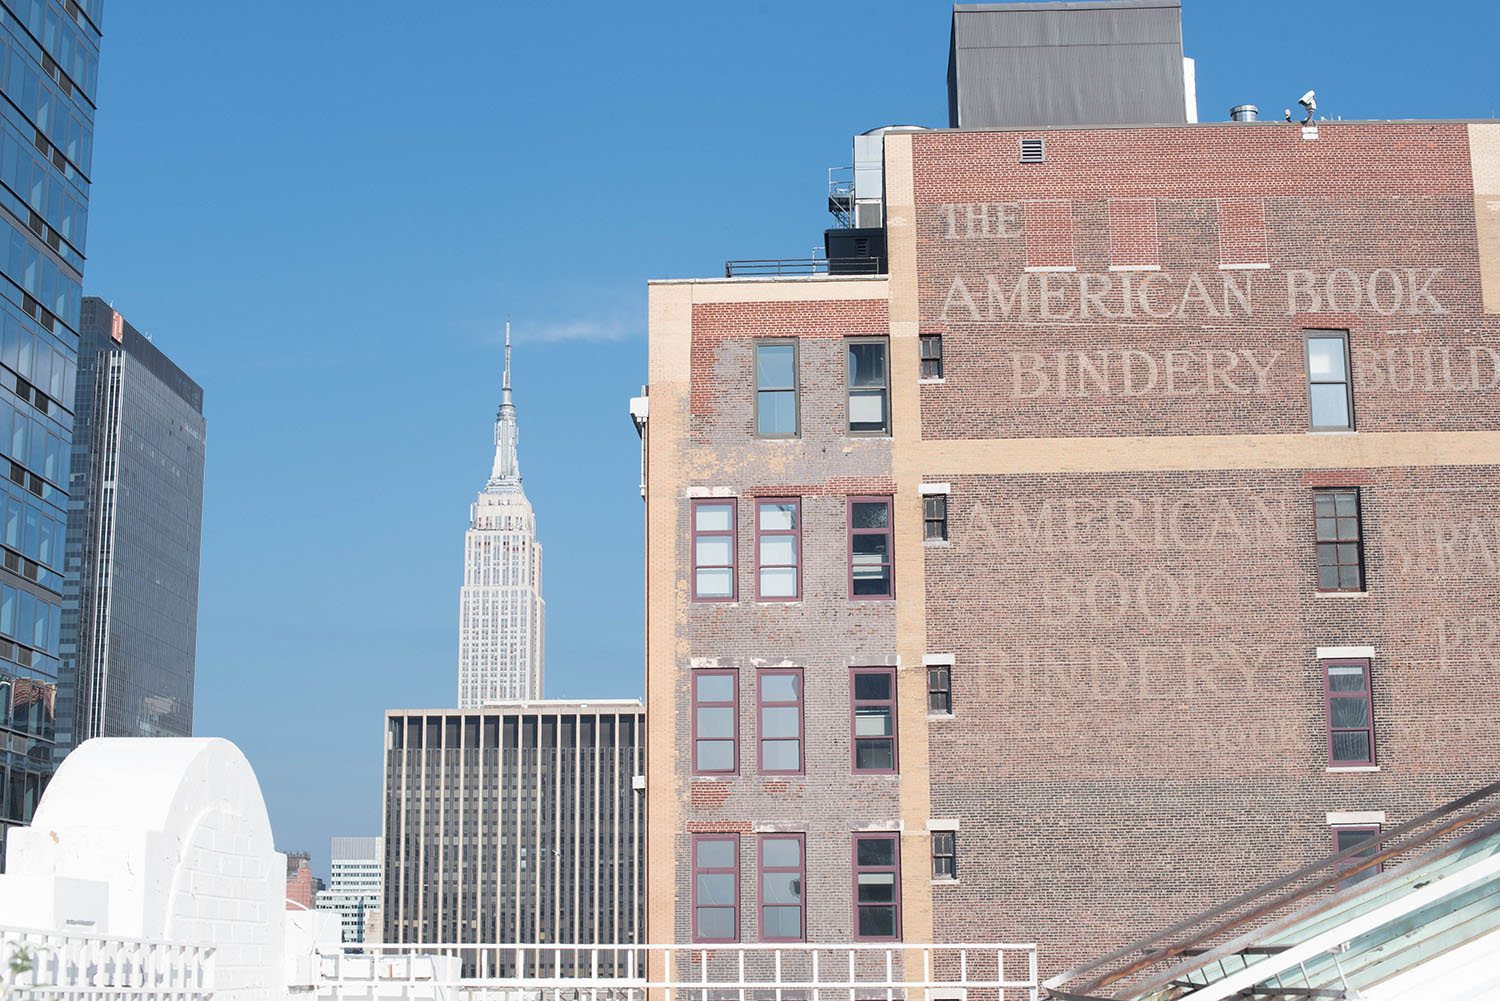 New York skyline, with the Empire State building and the American Book Bindery building, captured by travel blogger Cee Fardoe of Coco & Vera